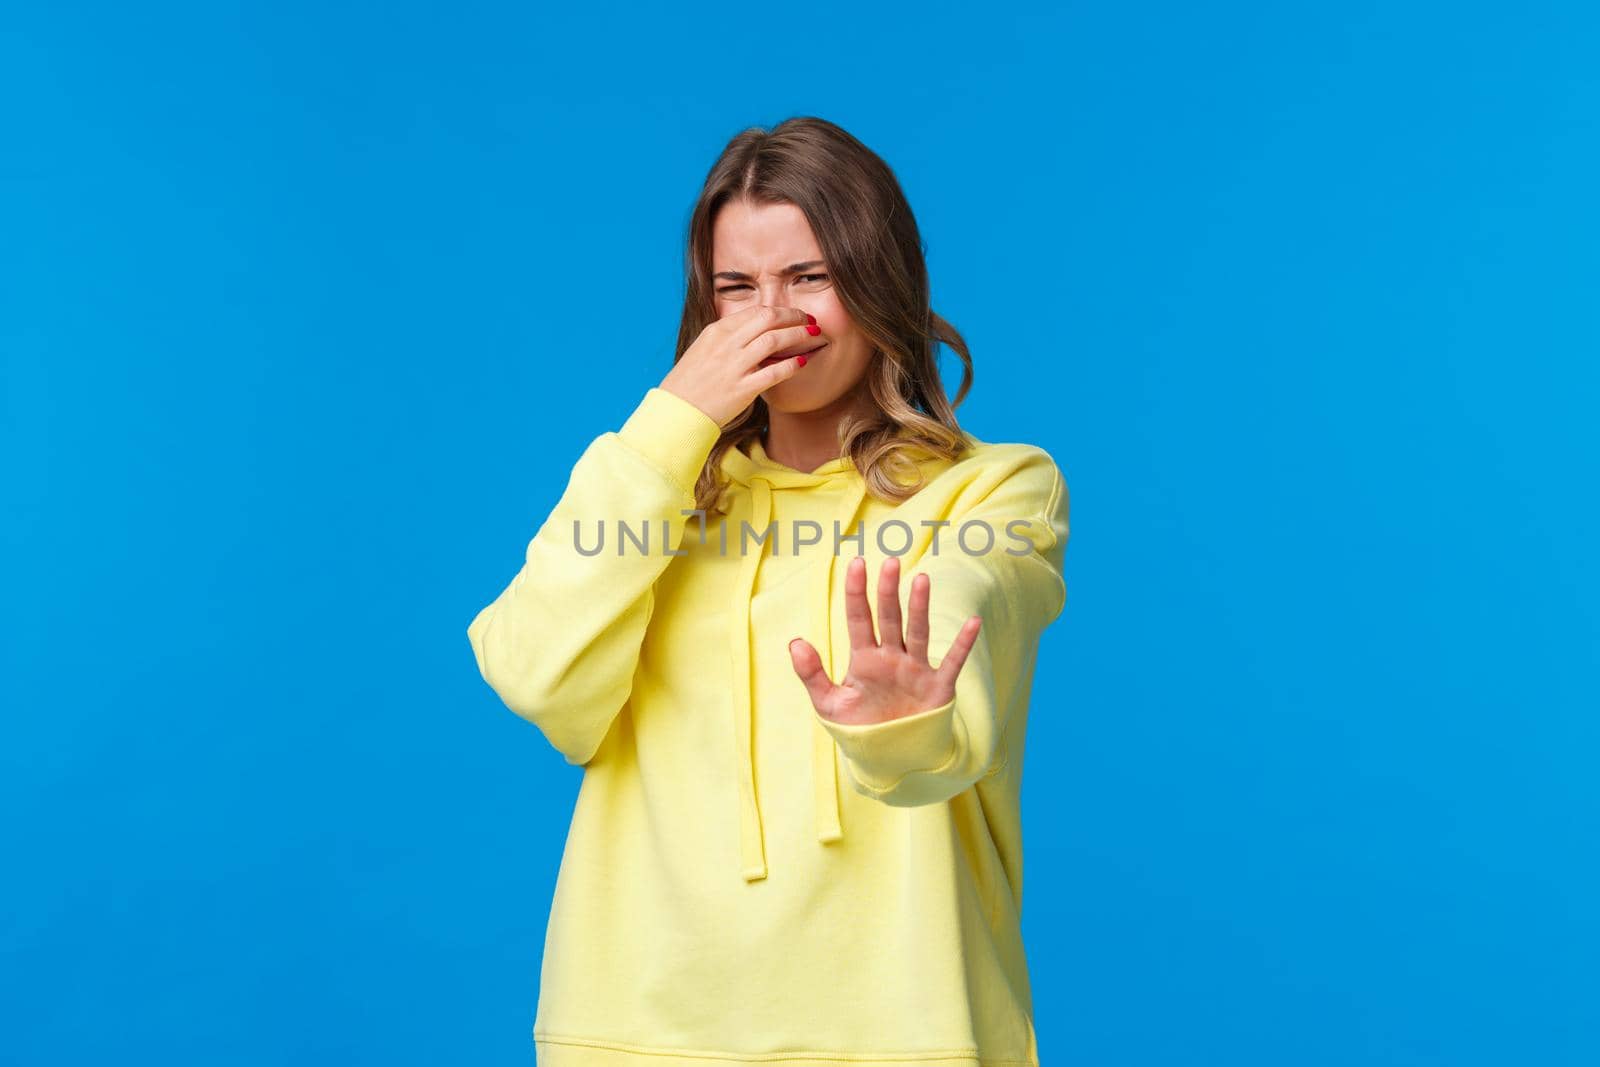 Oh gosh take this away from my face. Bothered and disturbed young blond woman close her nose and grimacing from awful nasty smell, pulling hand in stop refusal gesture, blue background.